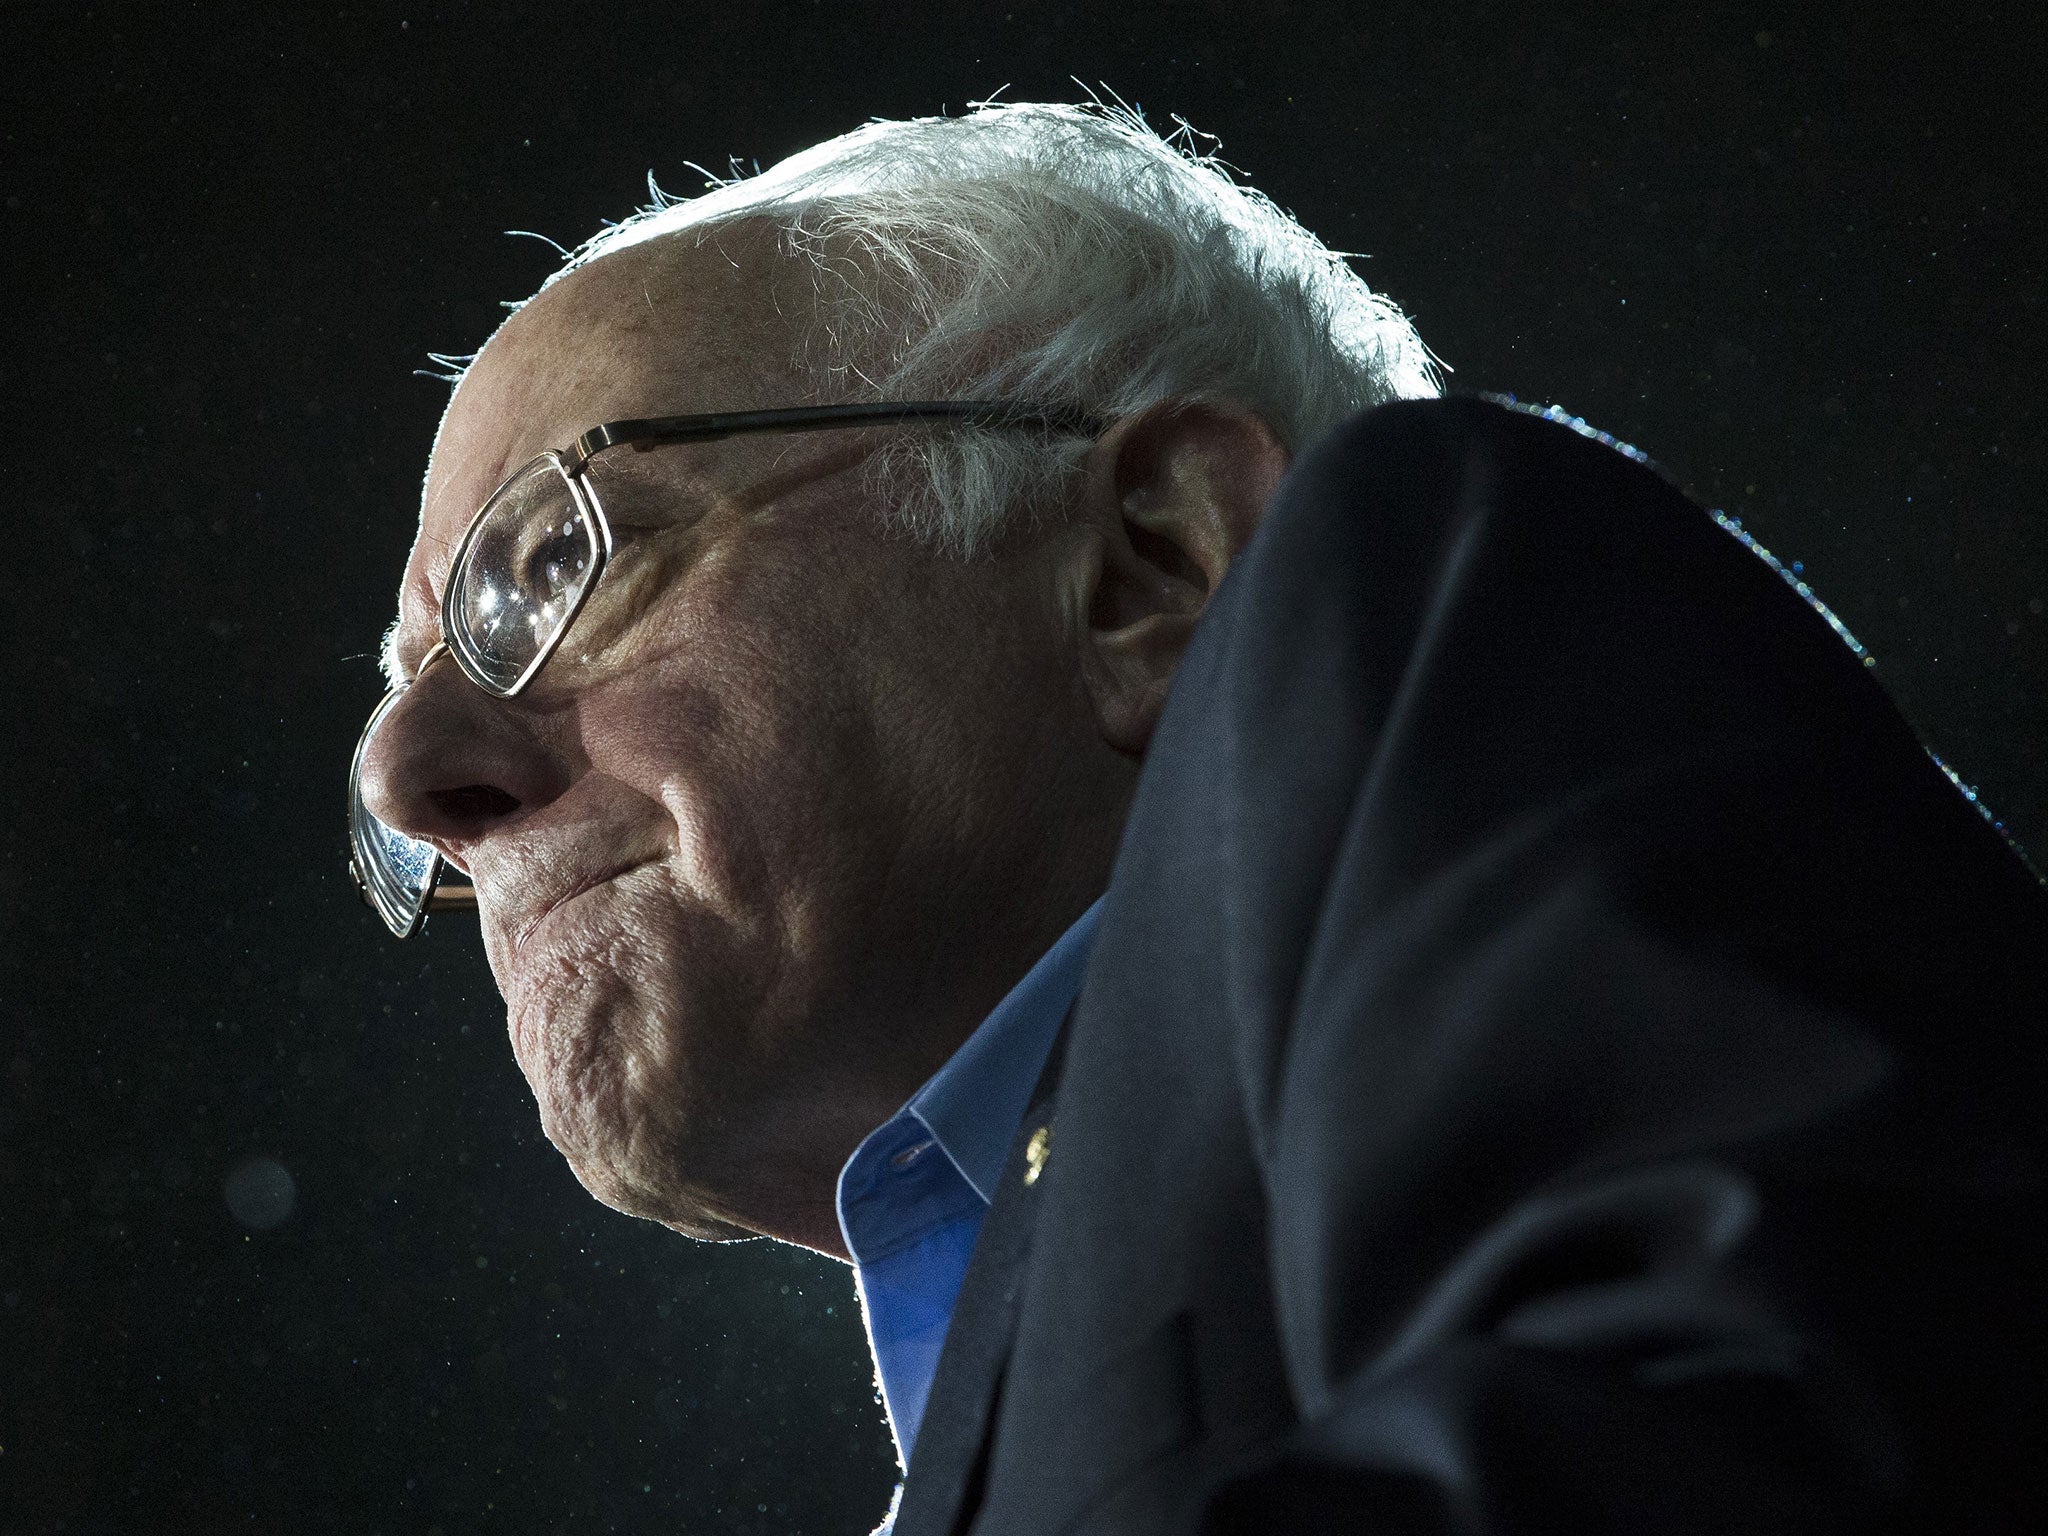 Economists debate whether GDP would grow 5.3 per cent if Bernie Sanders was elected